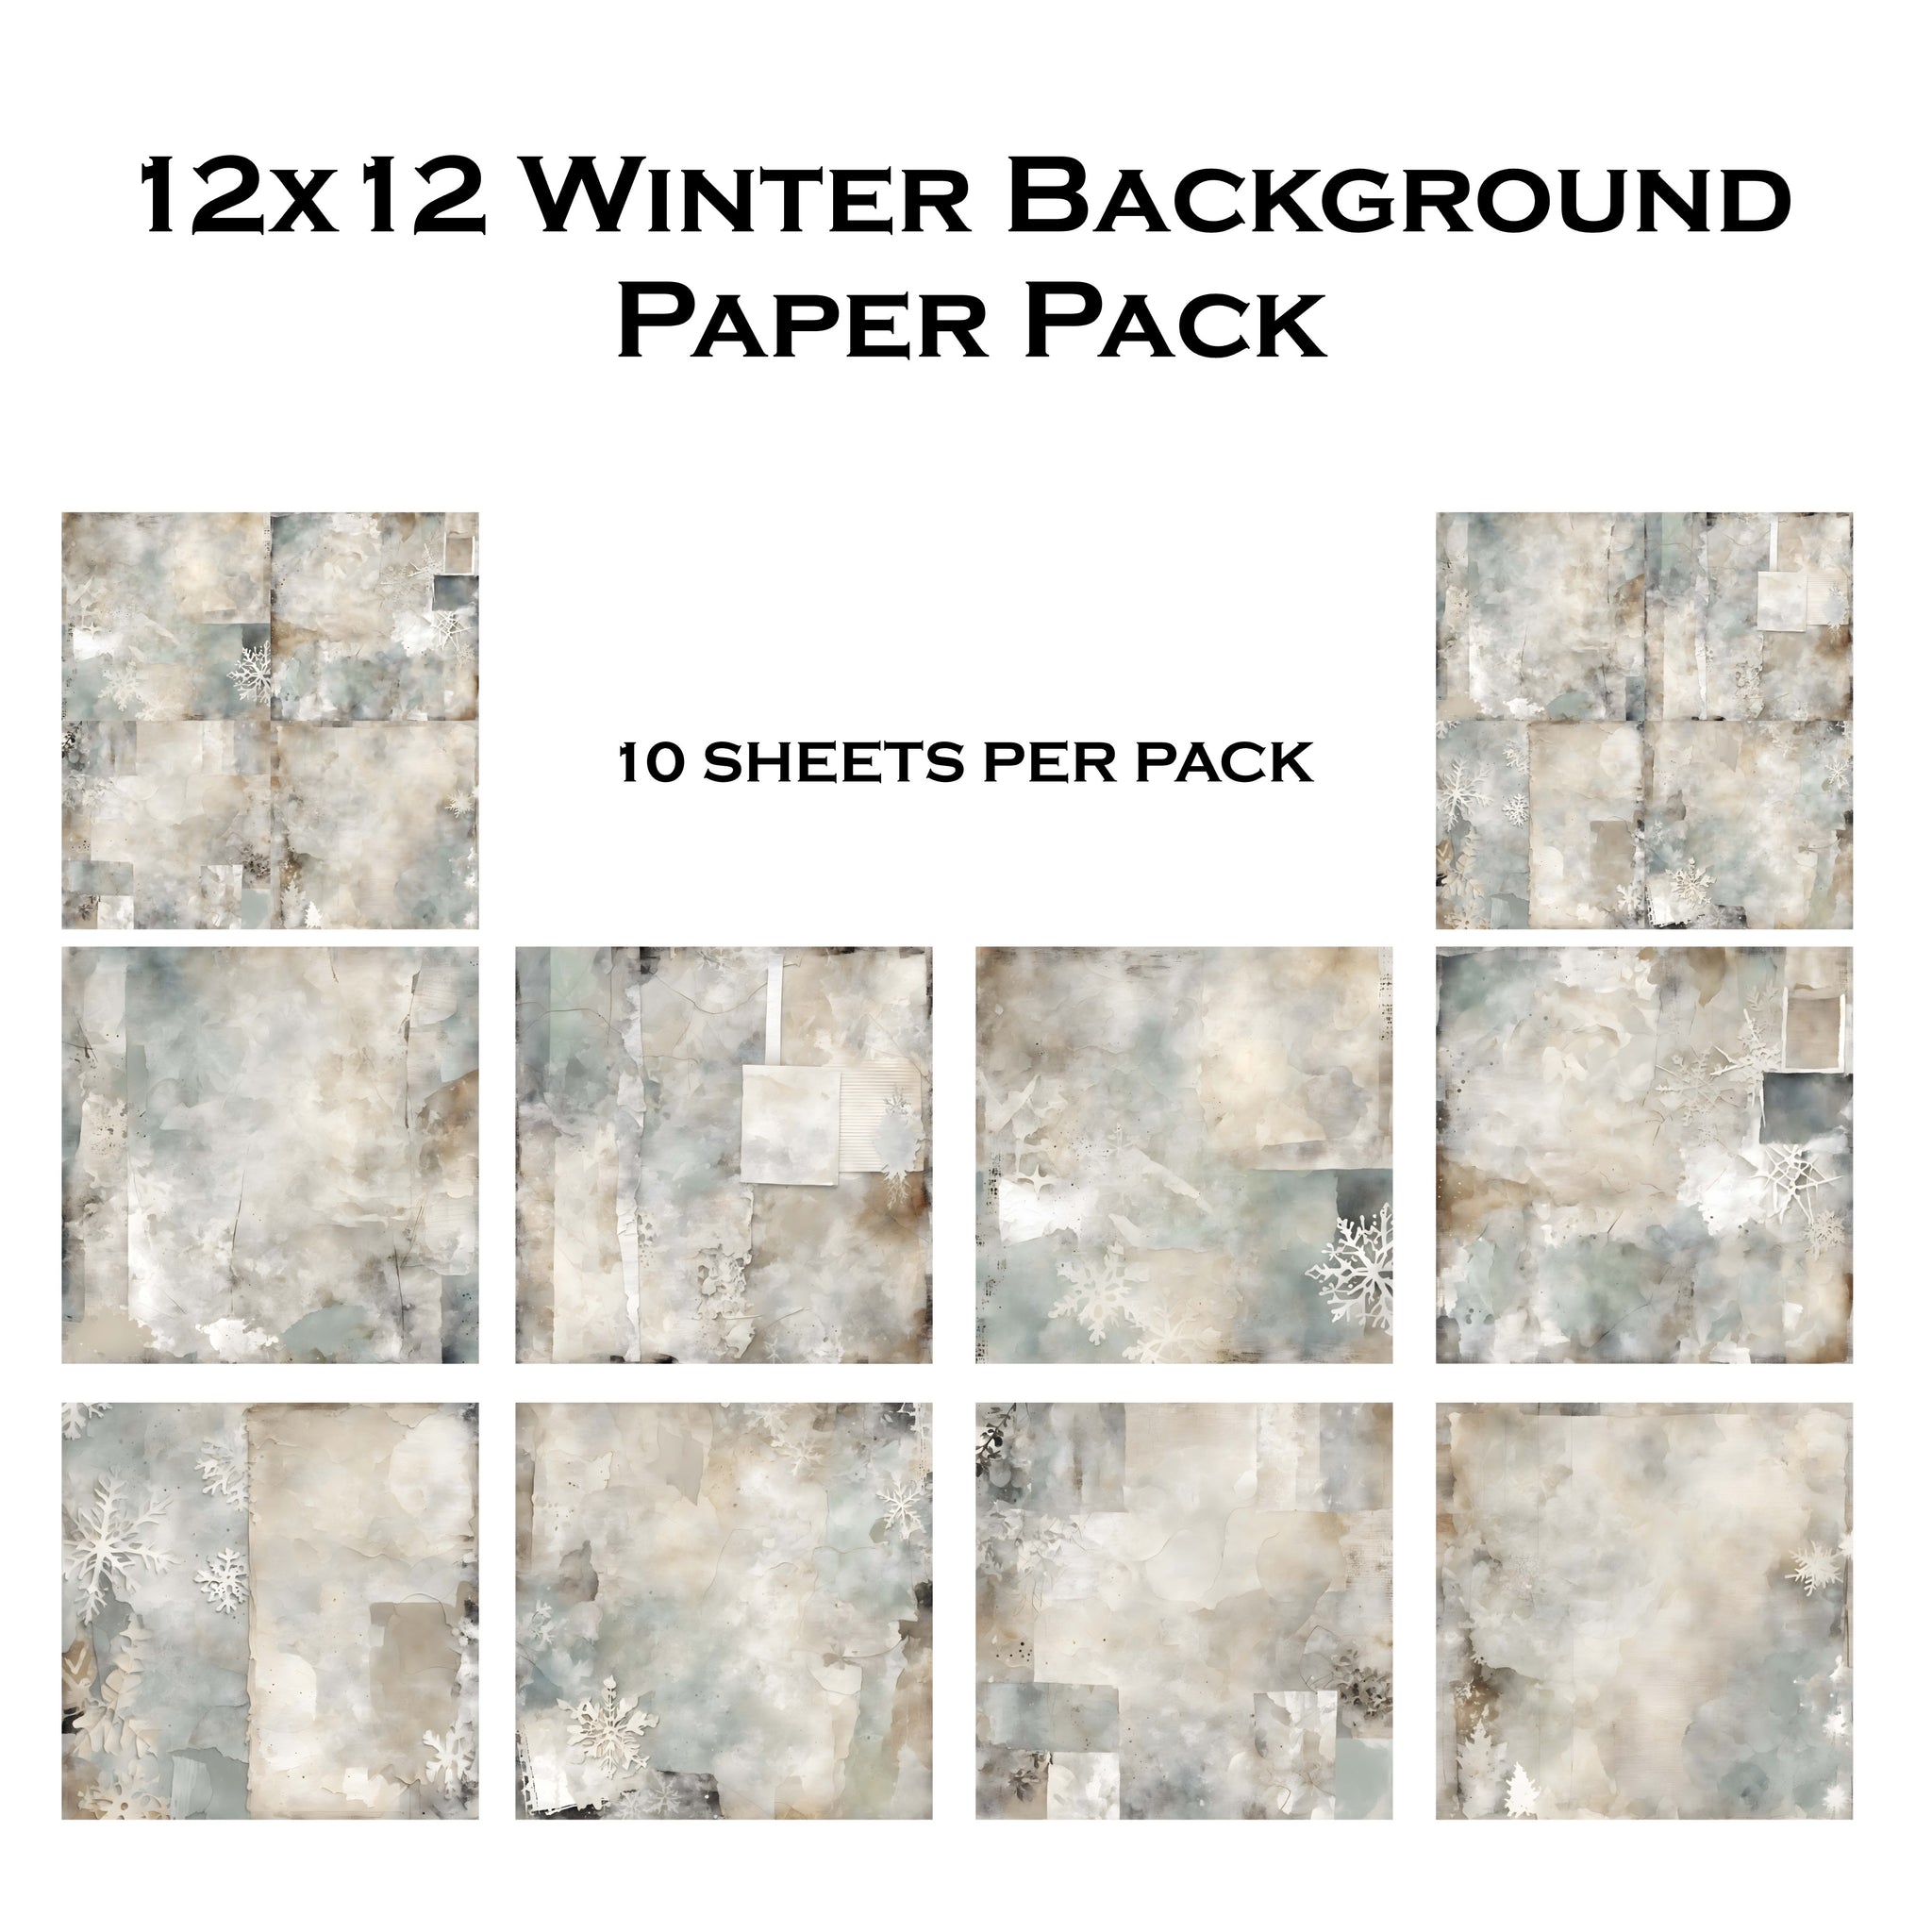 Winter Backgrounds 12x12 Paper Pack